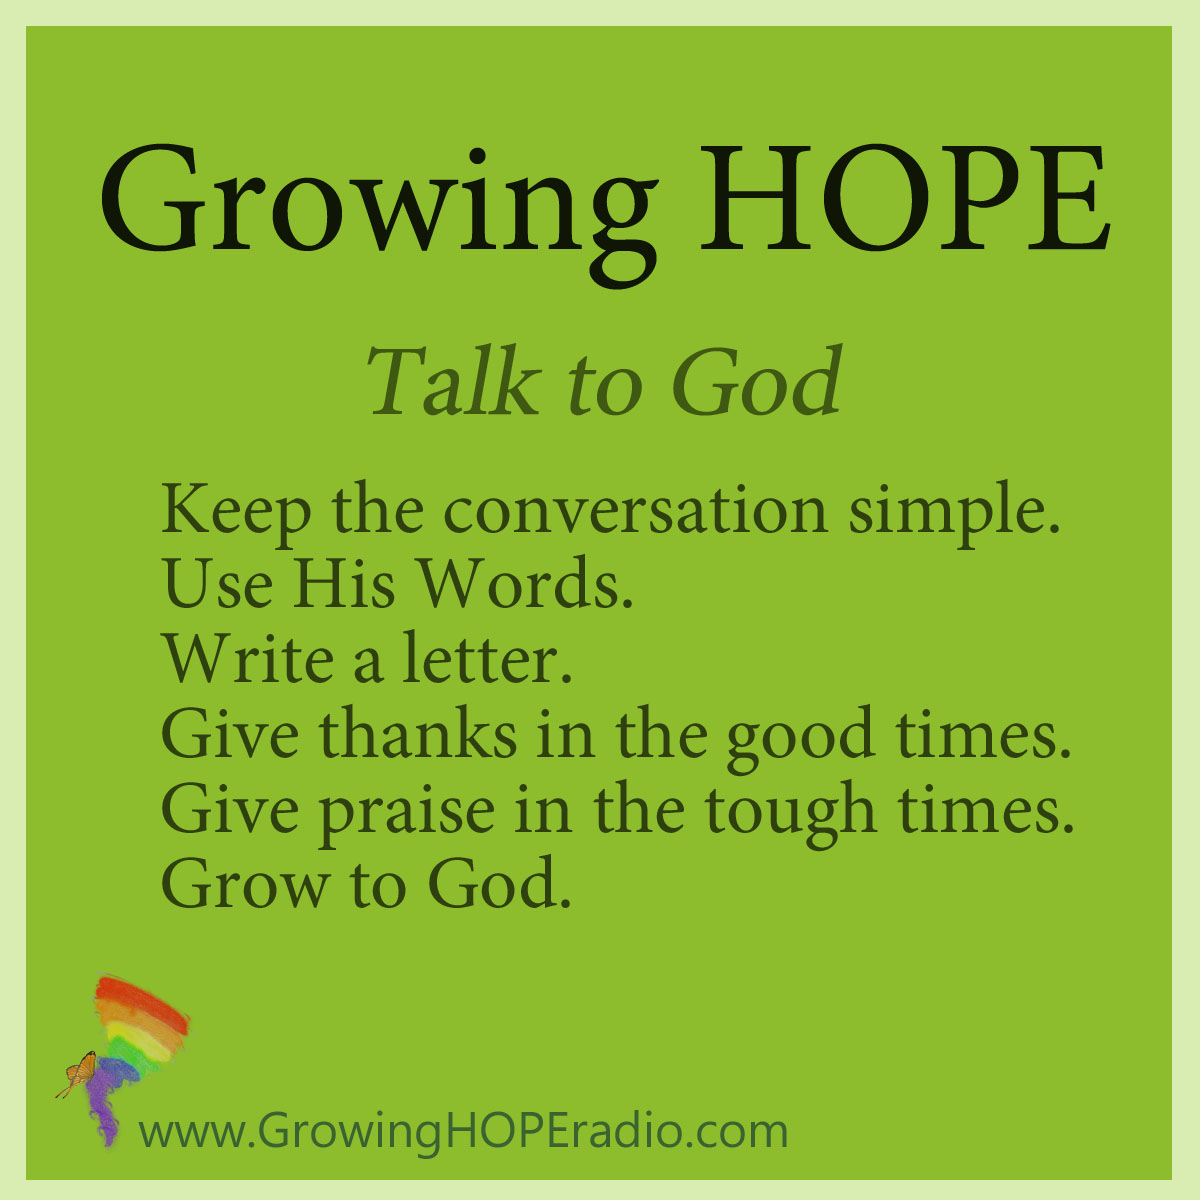 Growing HOPE Daily - 5 points - Talk to God